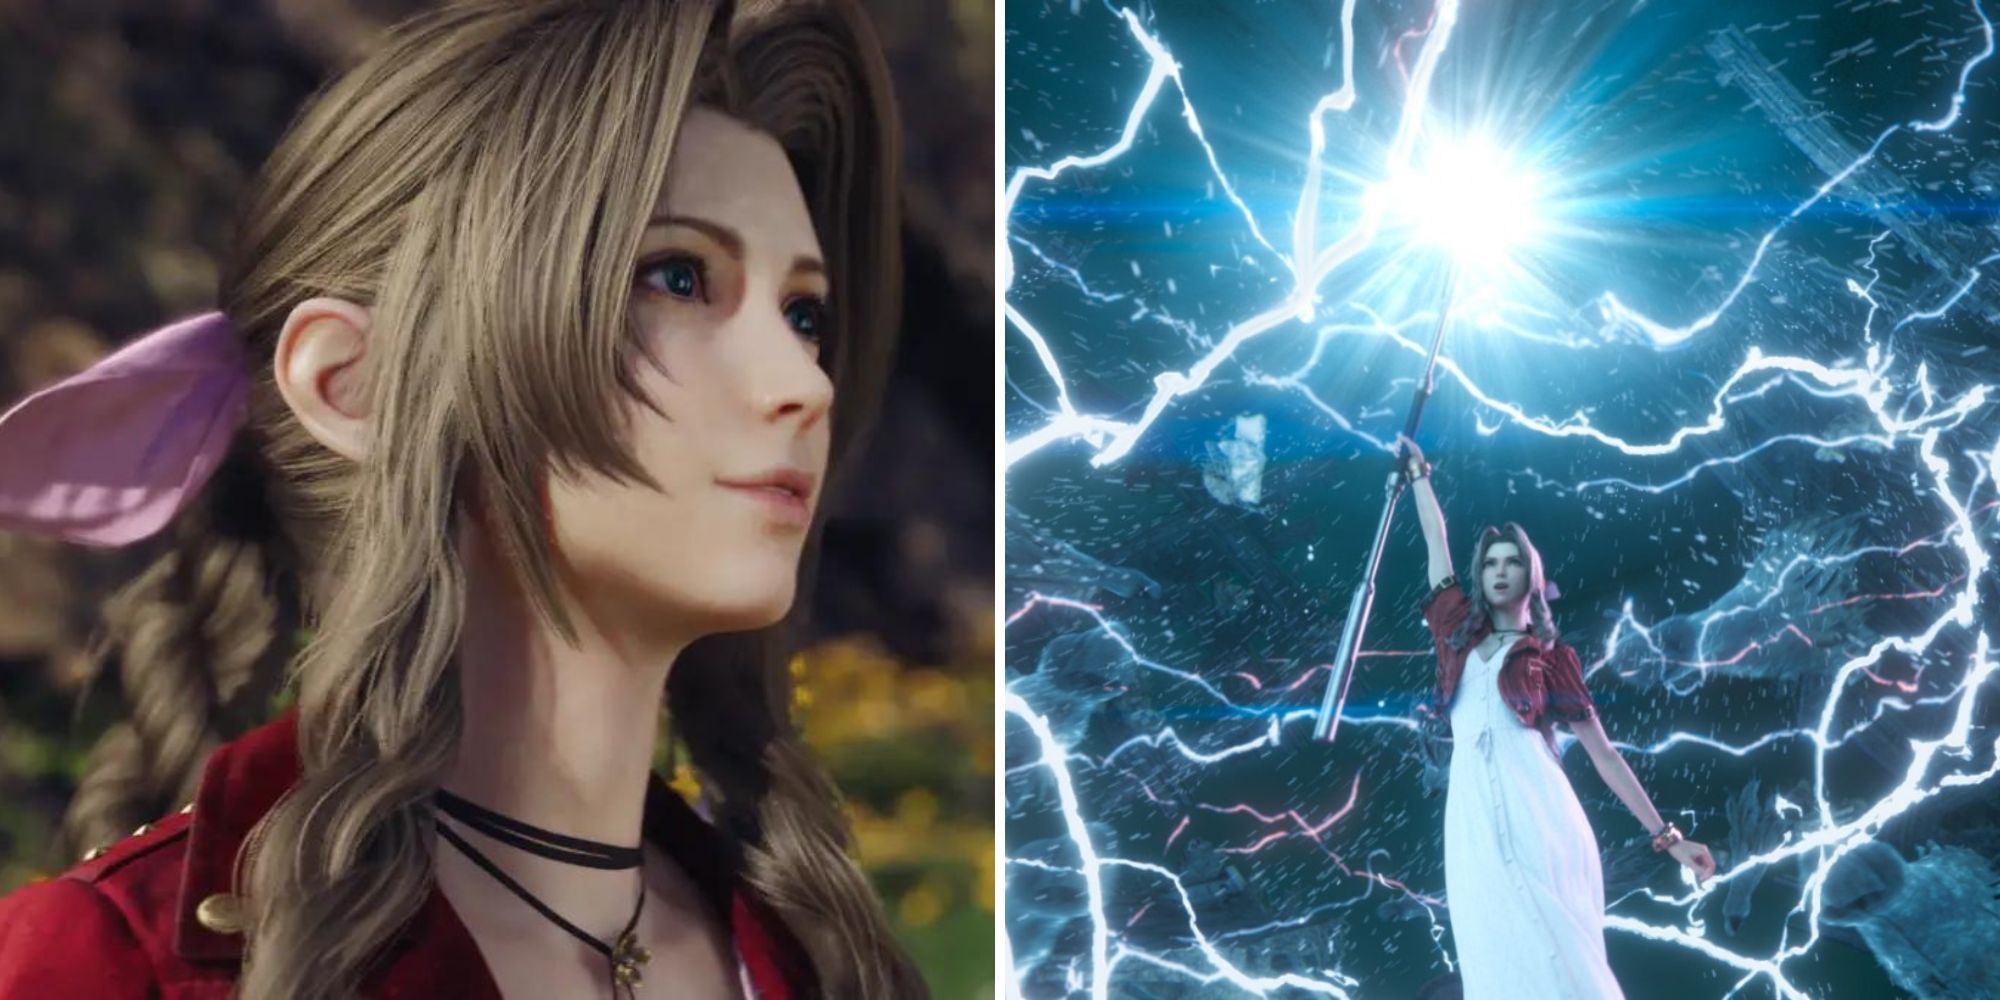 Aerith In The Grasslands & Using A Powerful Spell 